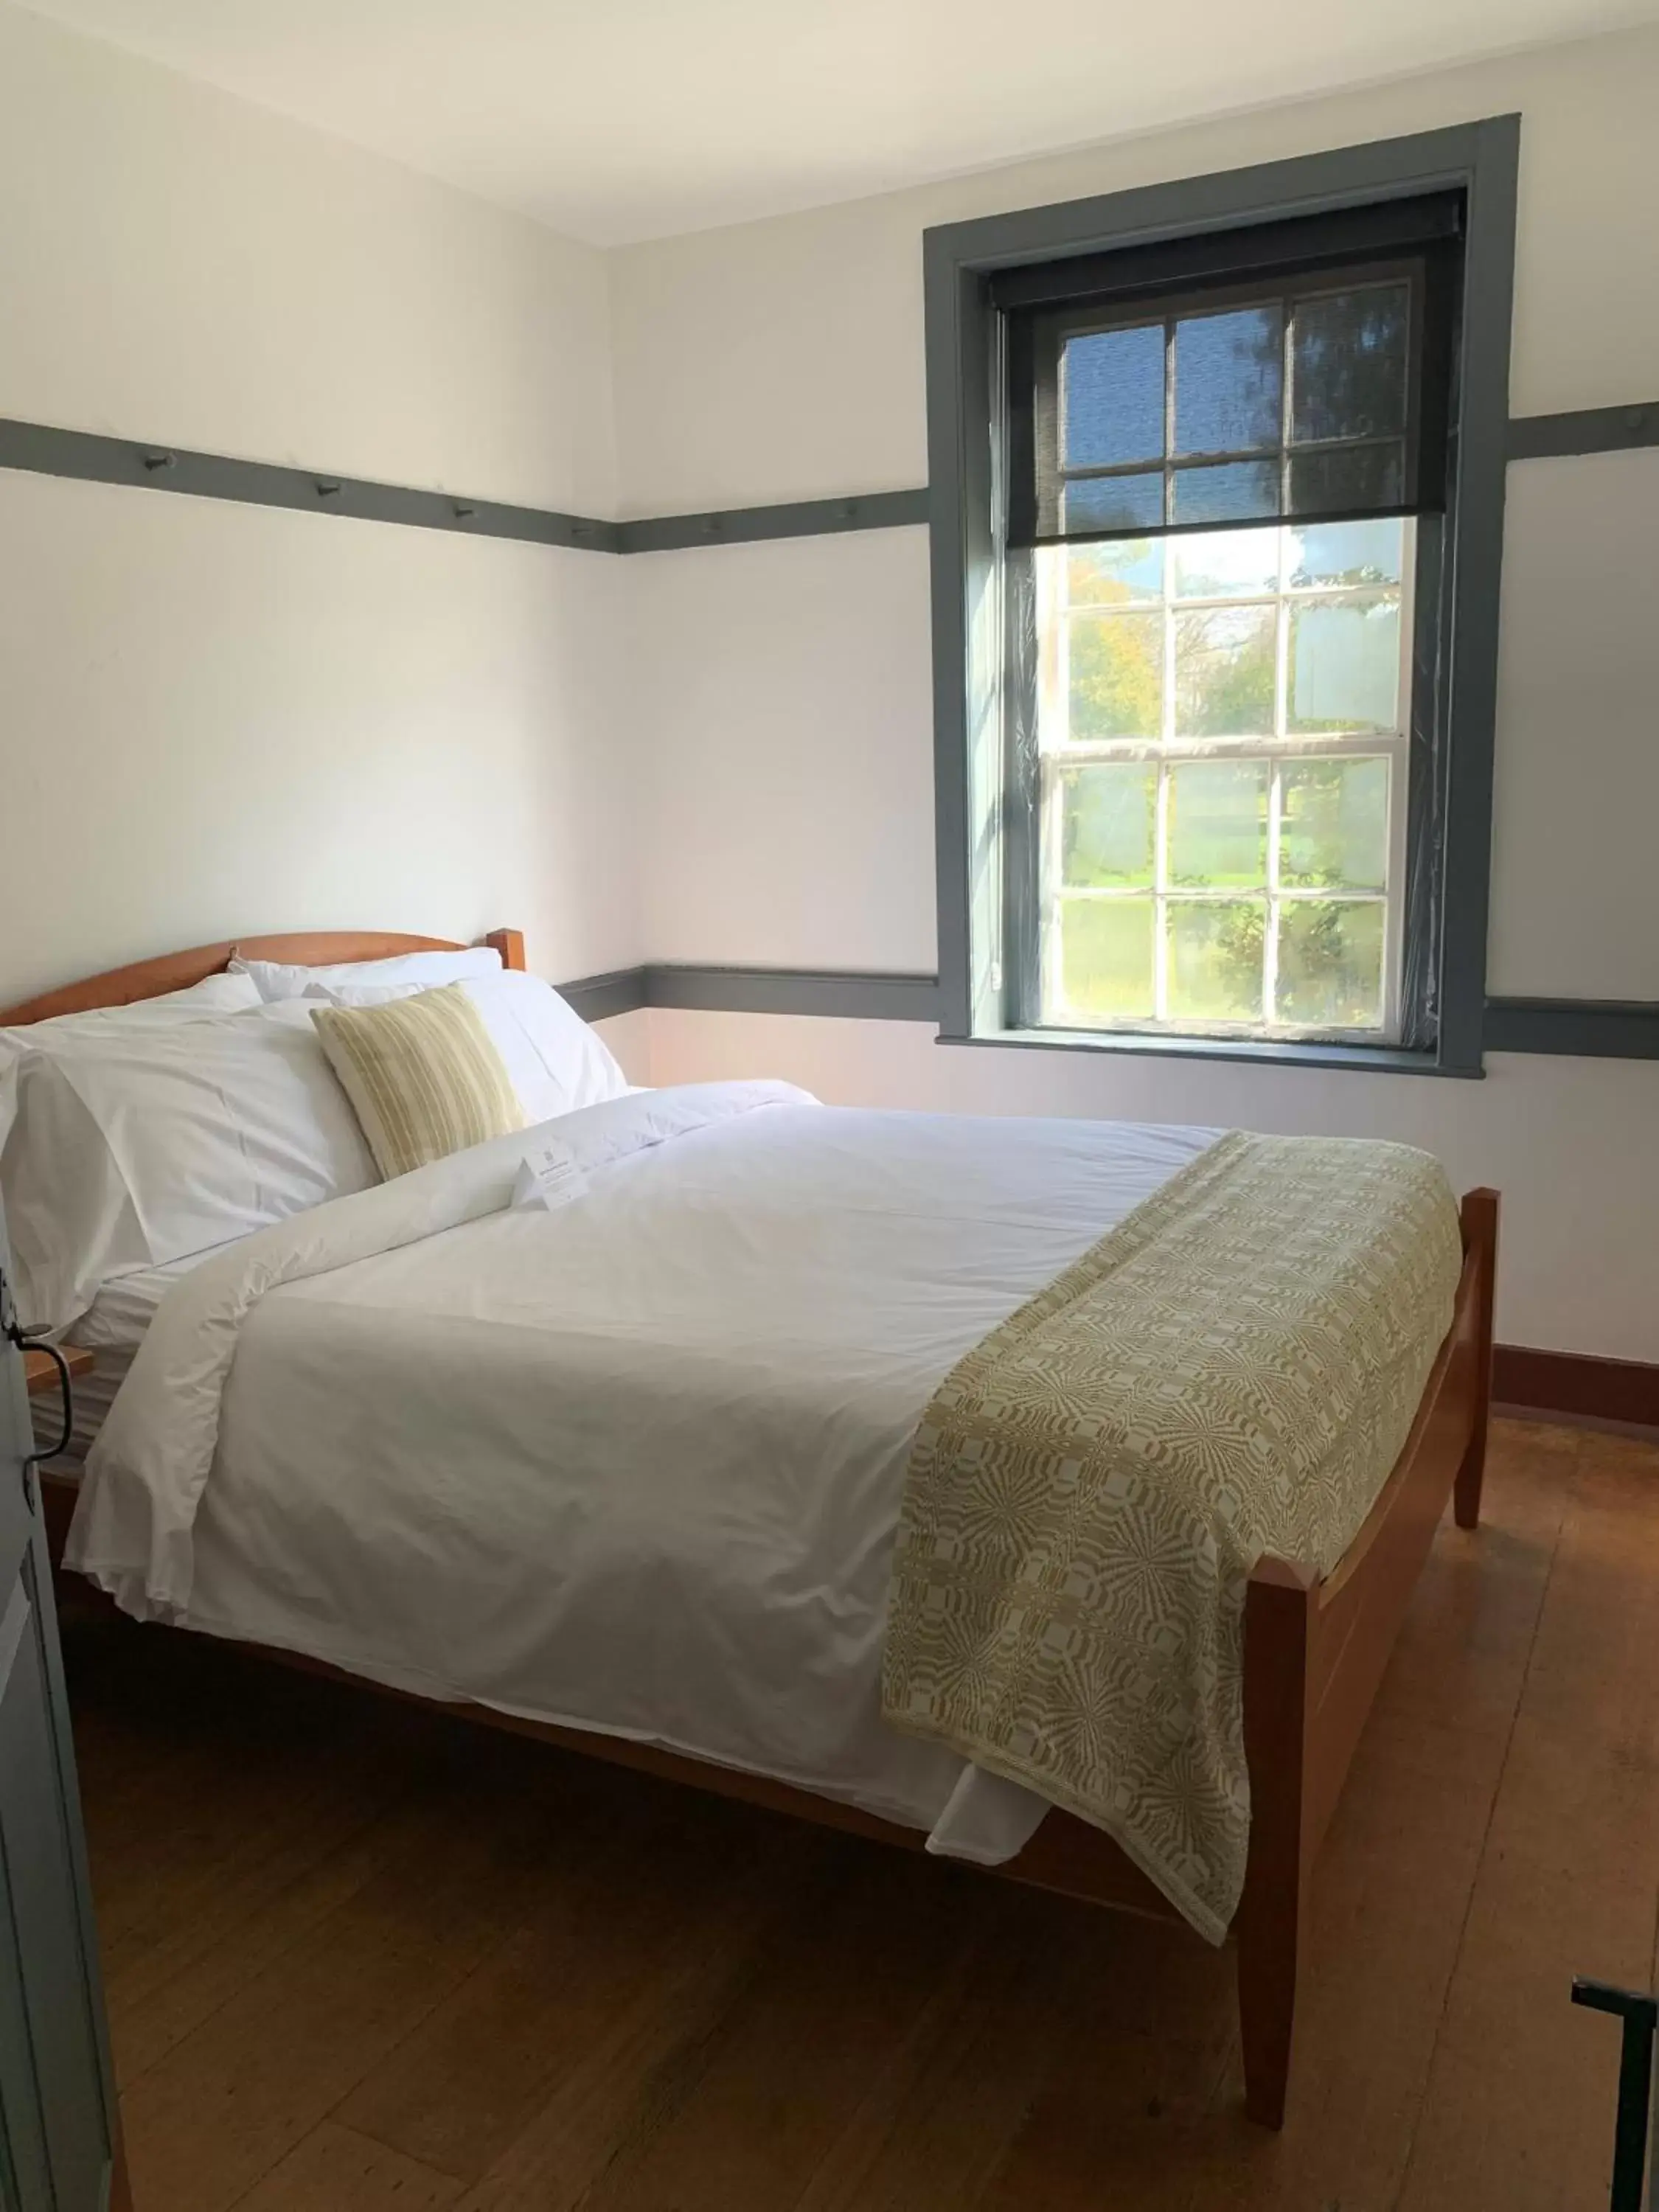 Family Suite in Shaker Village of Pleasant Hill